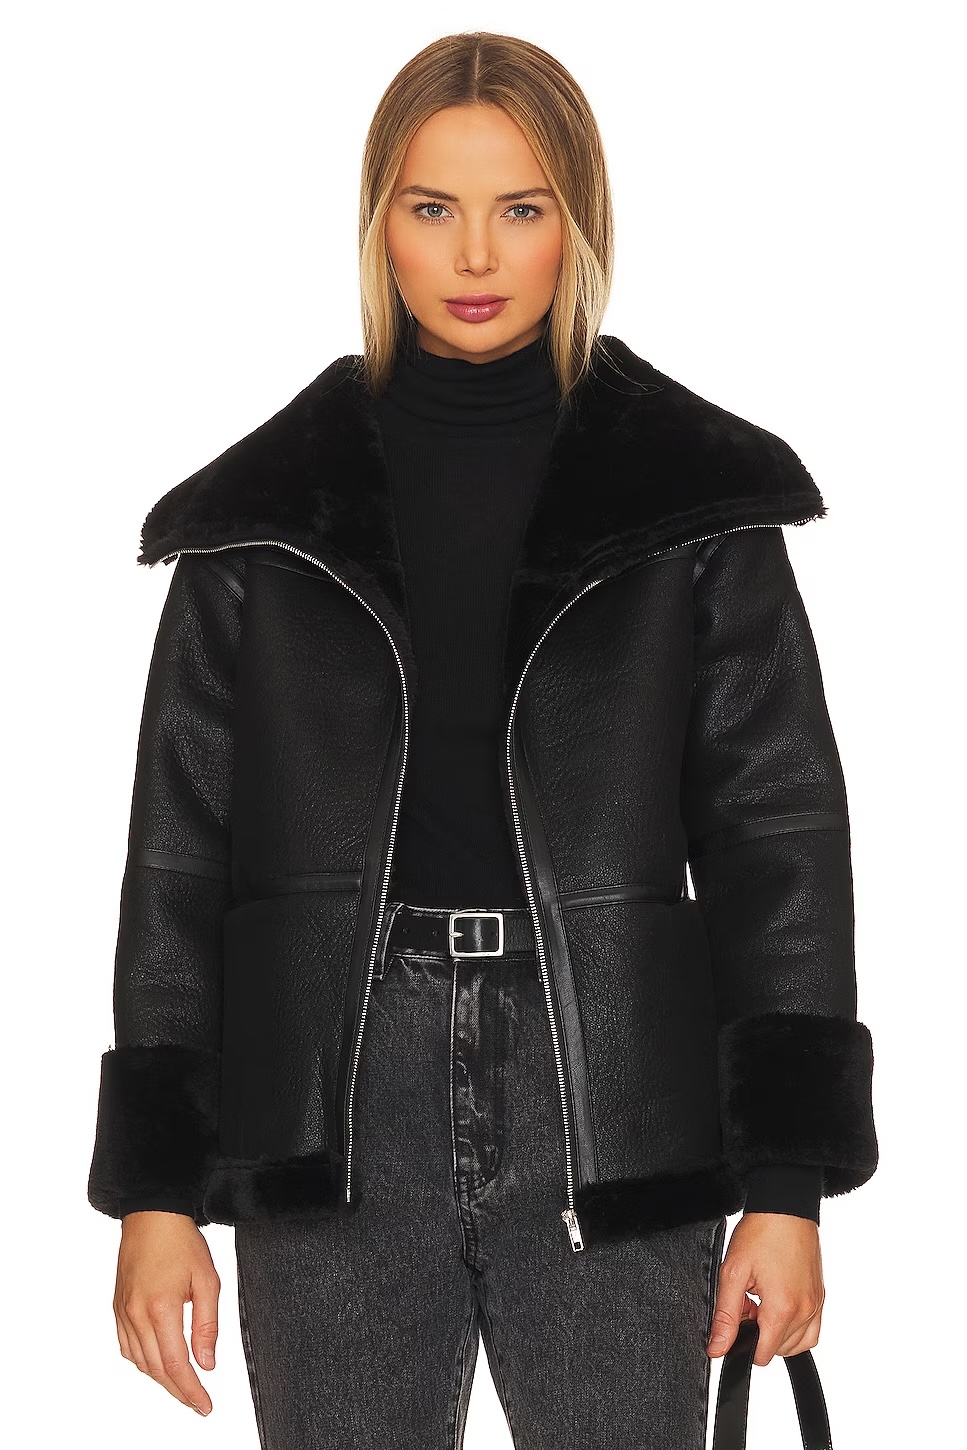 Mob Wife Aesthetic Coats That Totally Channel Carmela Soprano - Betches